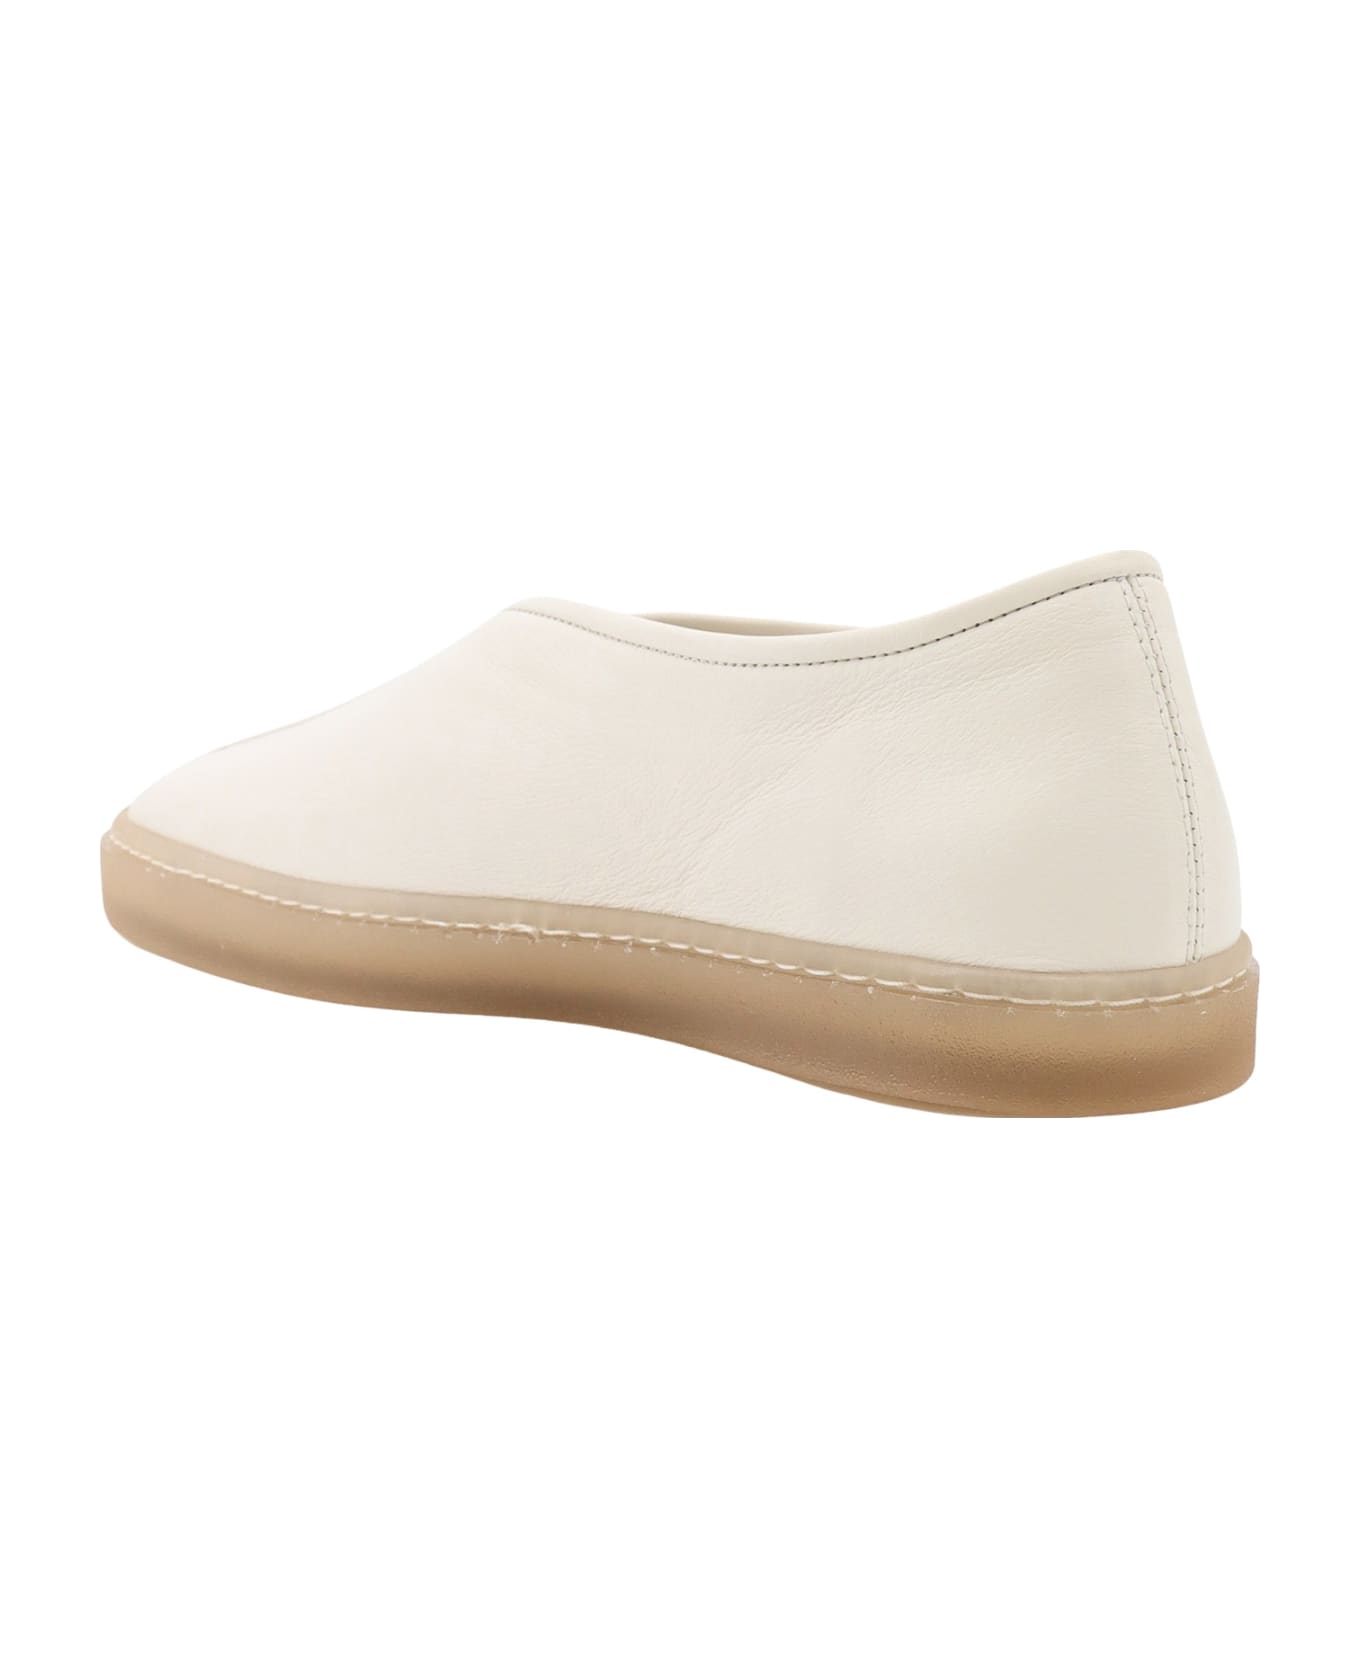 Lemaire Piped Sneakers - White フラットシューズ